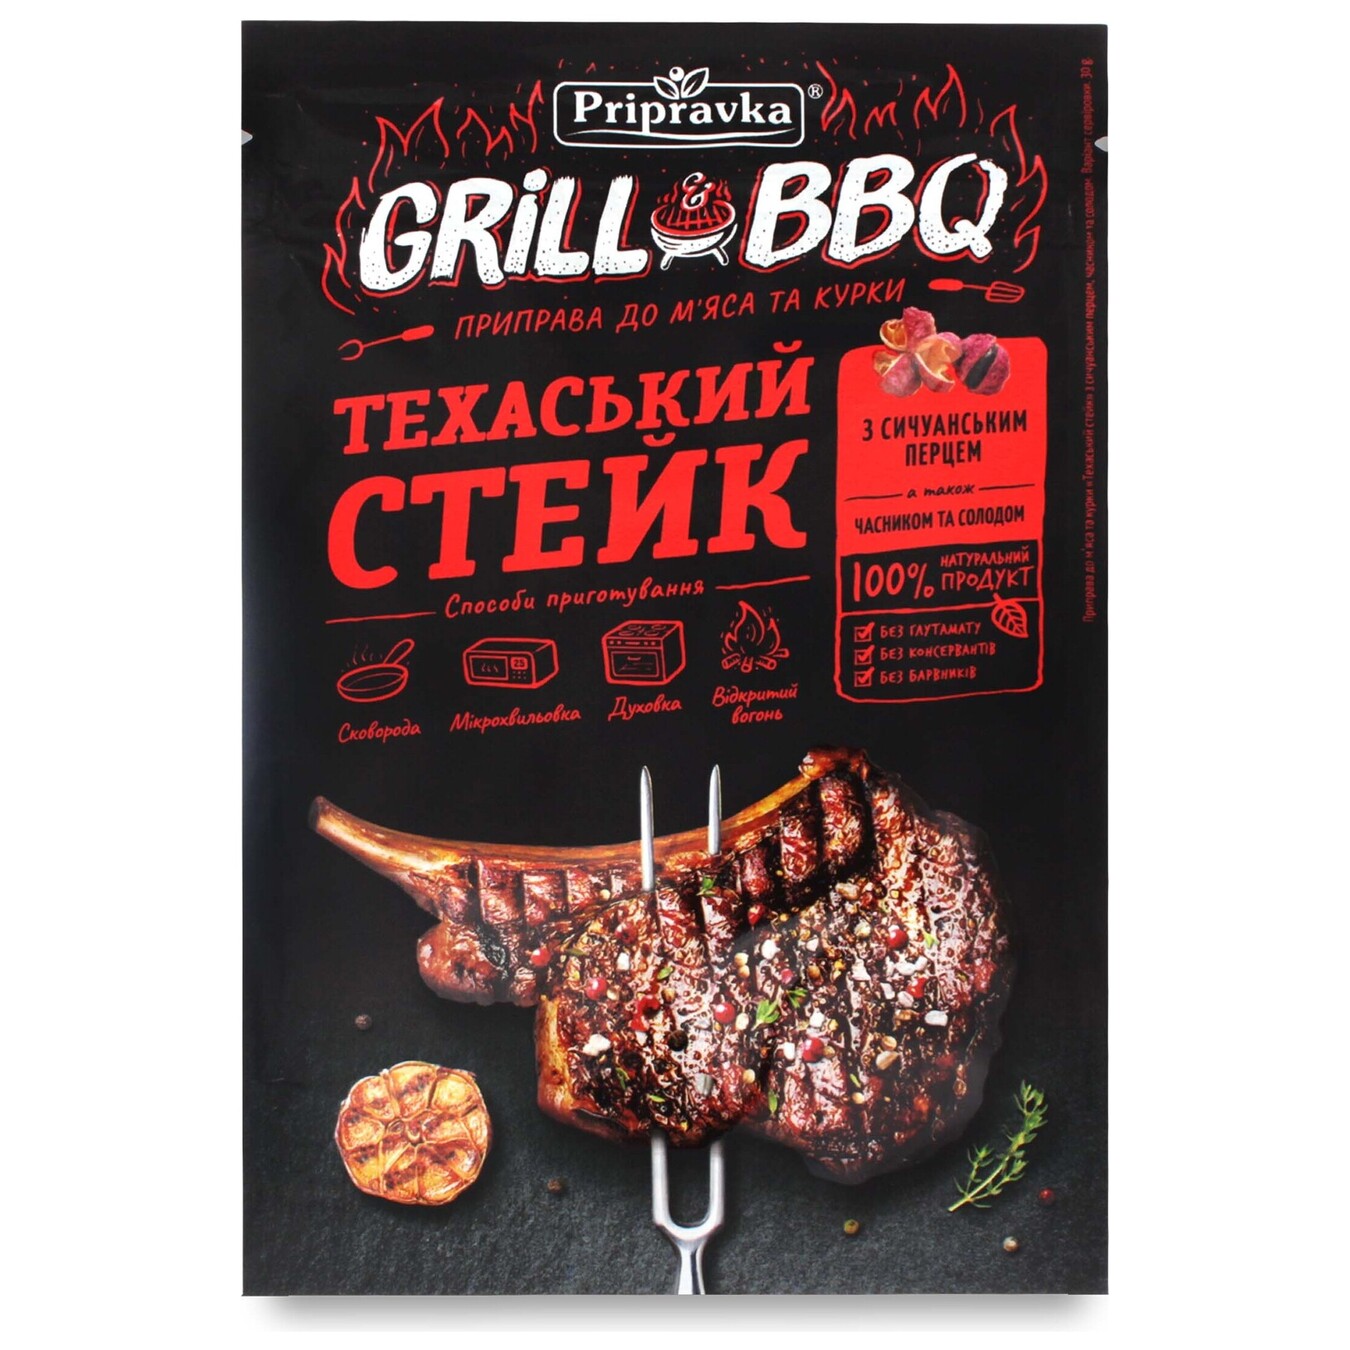 Pripravka Grill & BBQ seasoning for meat and chicken Texas steak with Sichuan pepper, garlic and malt 30g